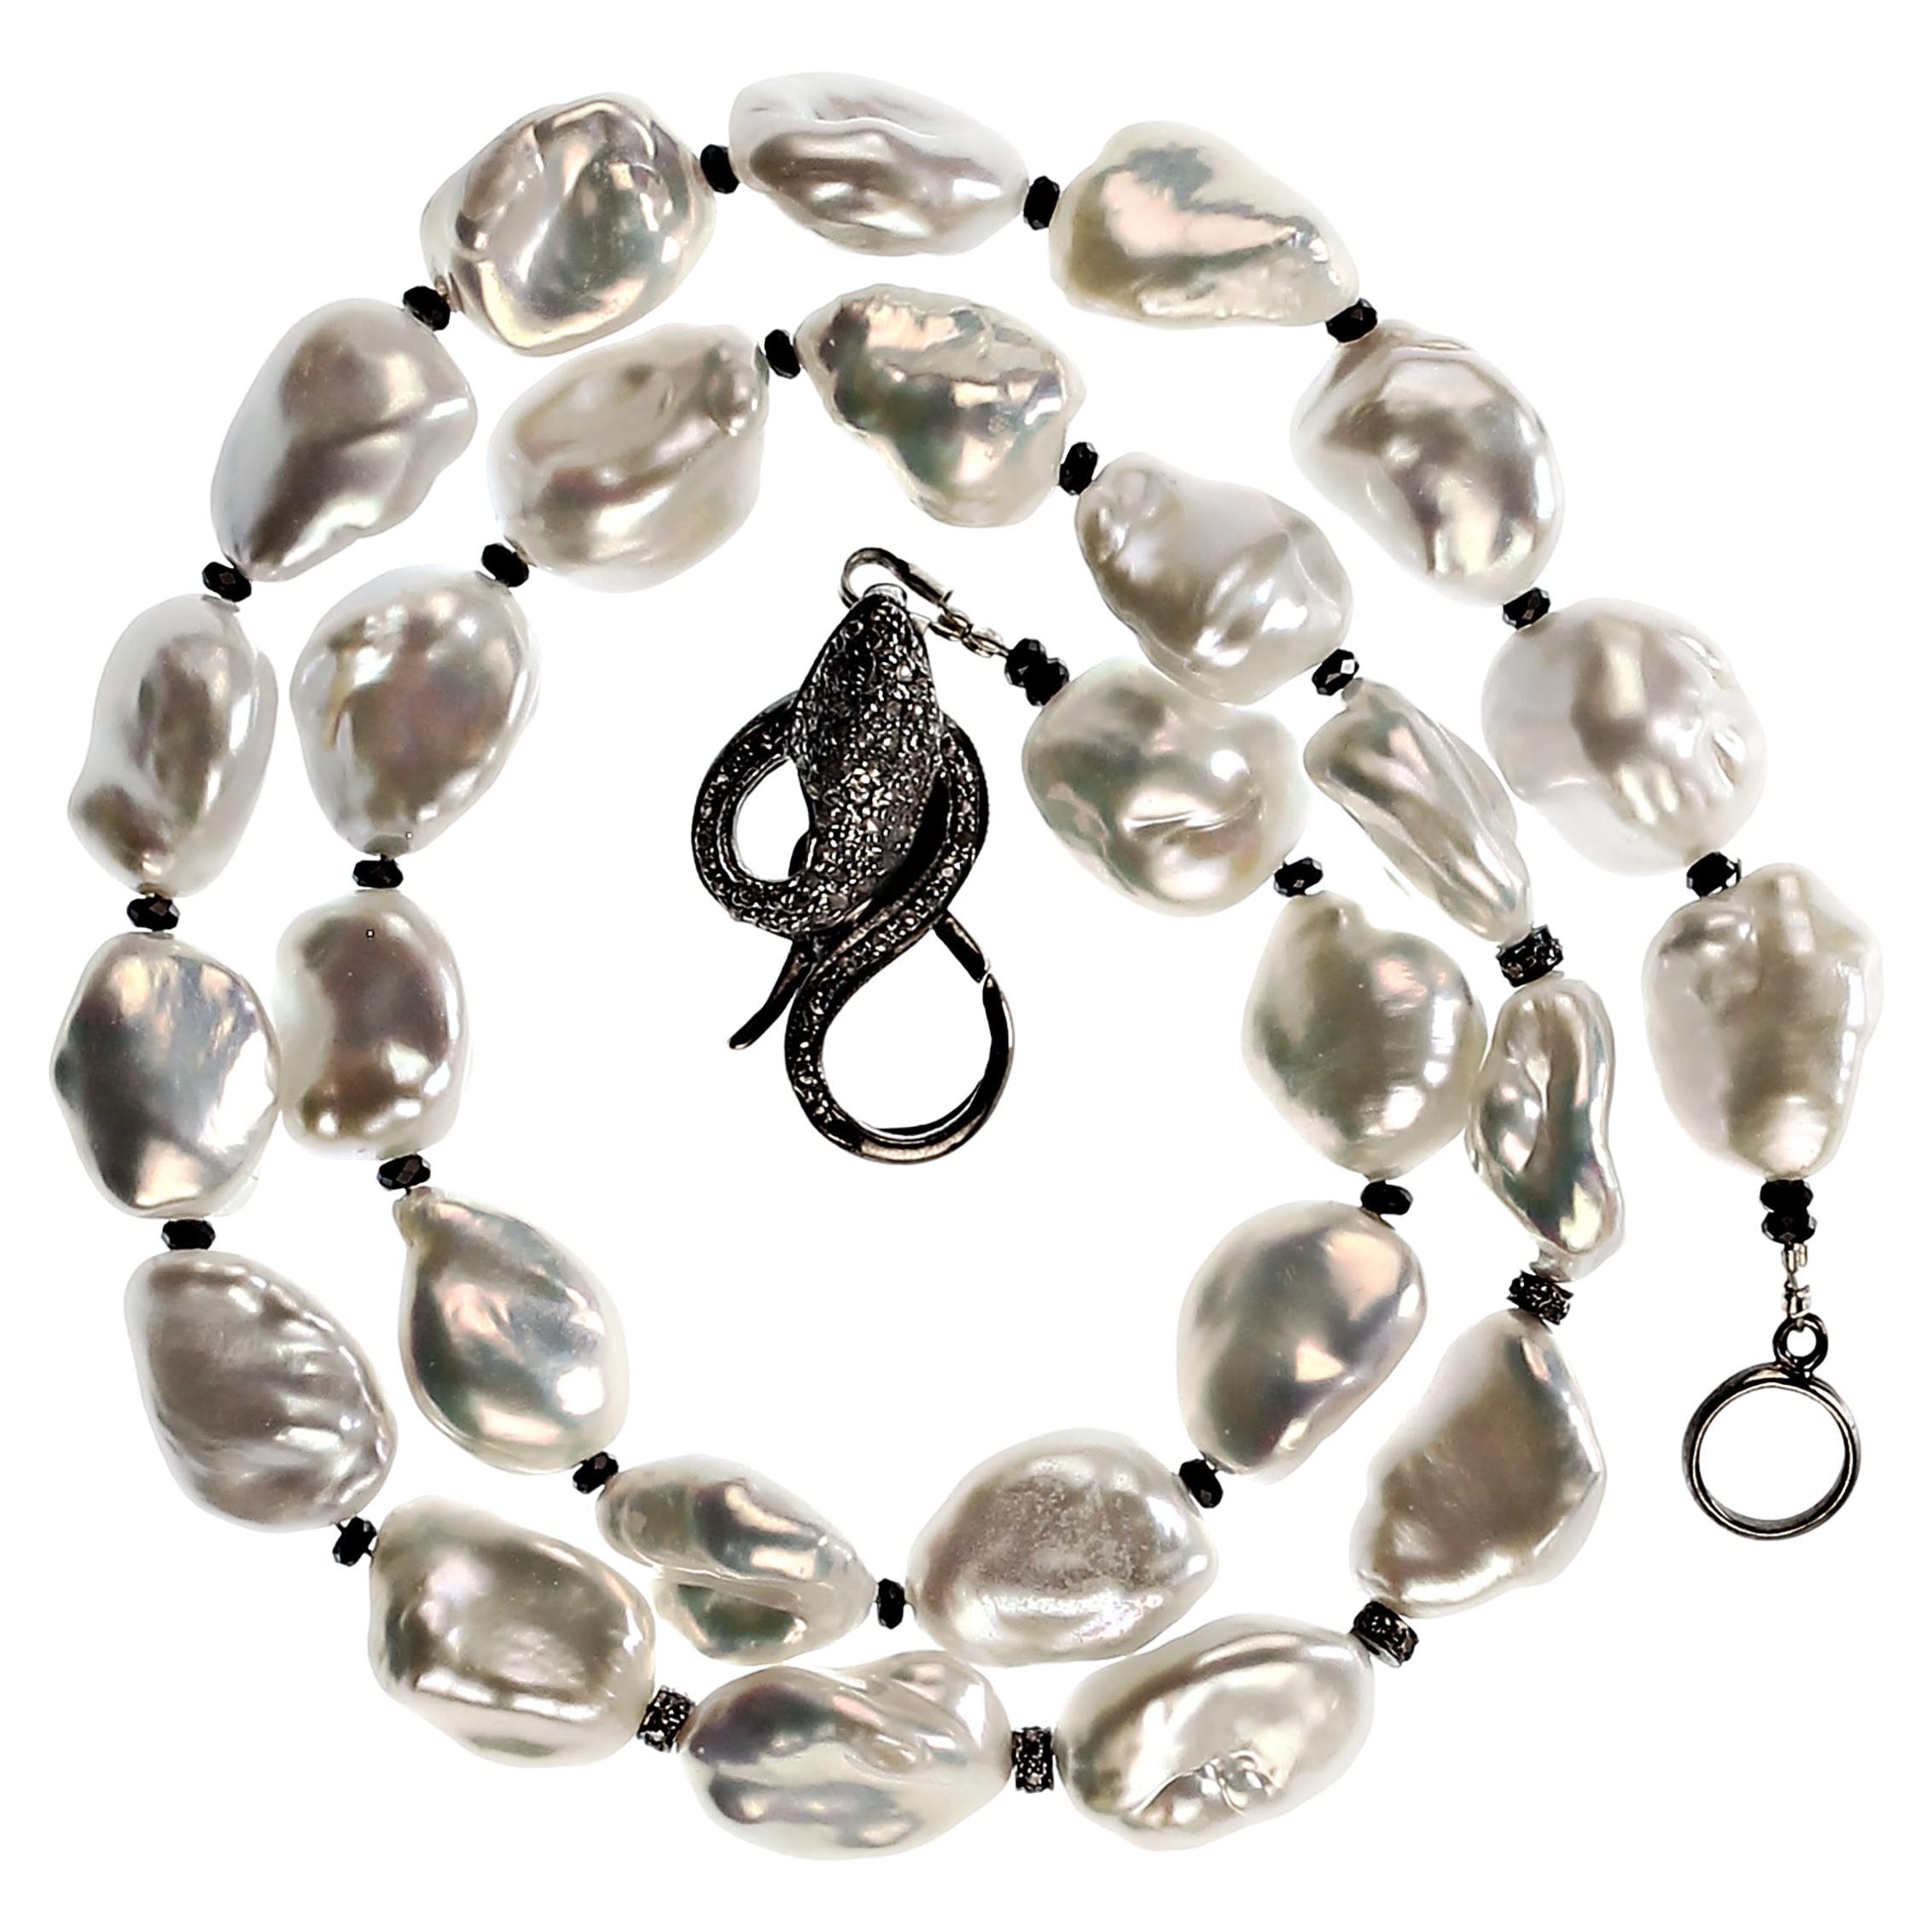 AJD Iridescent Silver Baroque Pearl Necklace and Diamond Accents 17 Inch For Sale